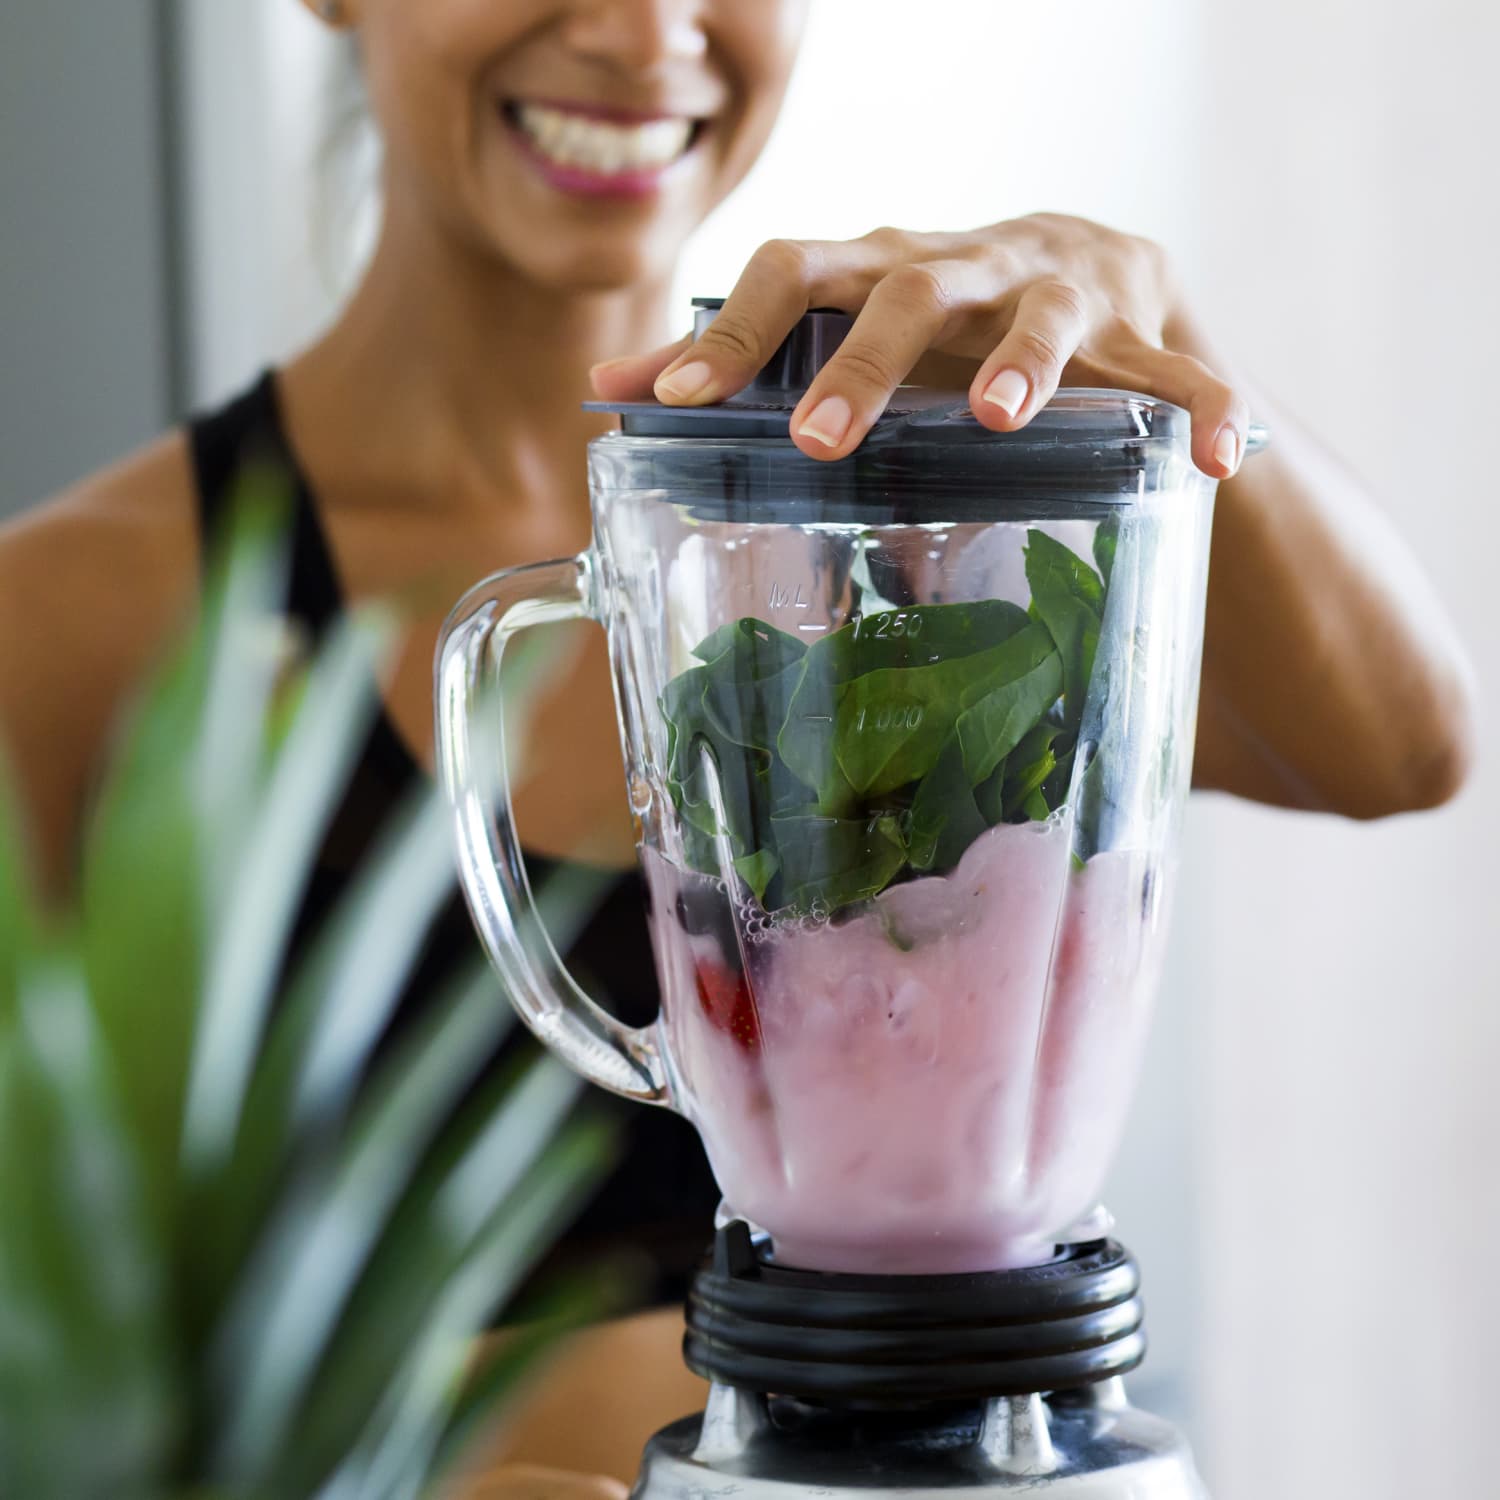 Affordable Quality: 9 Top-Rated Blenders Under $200